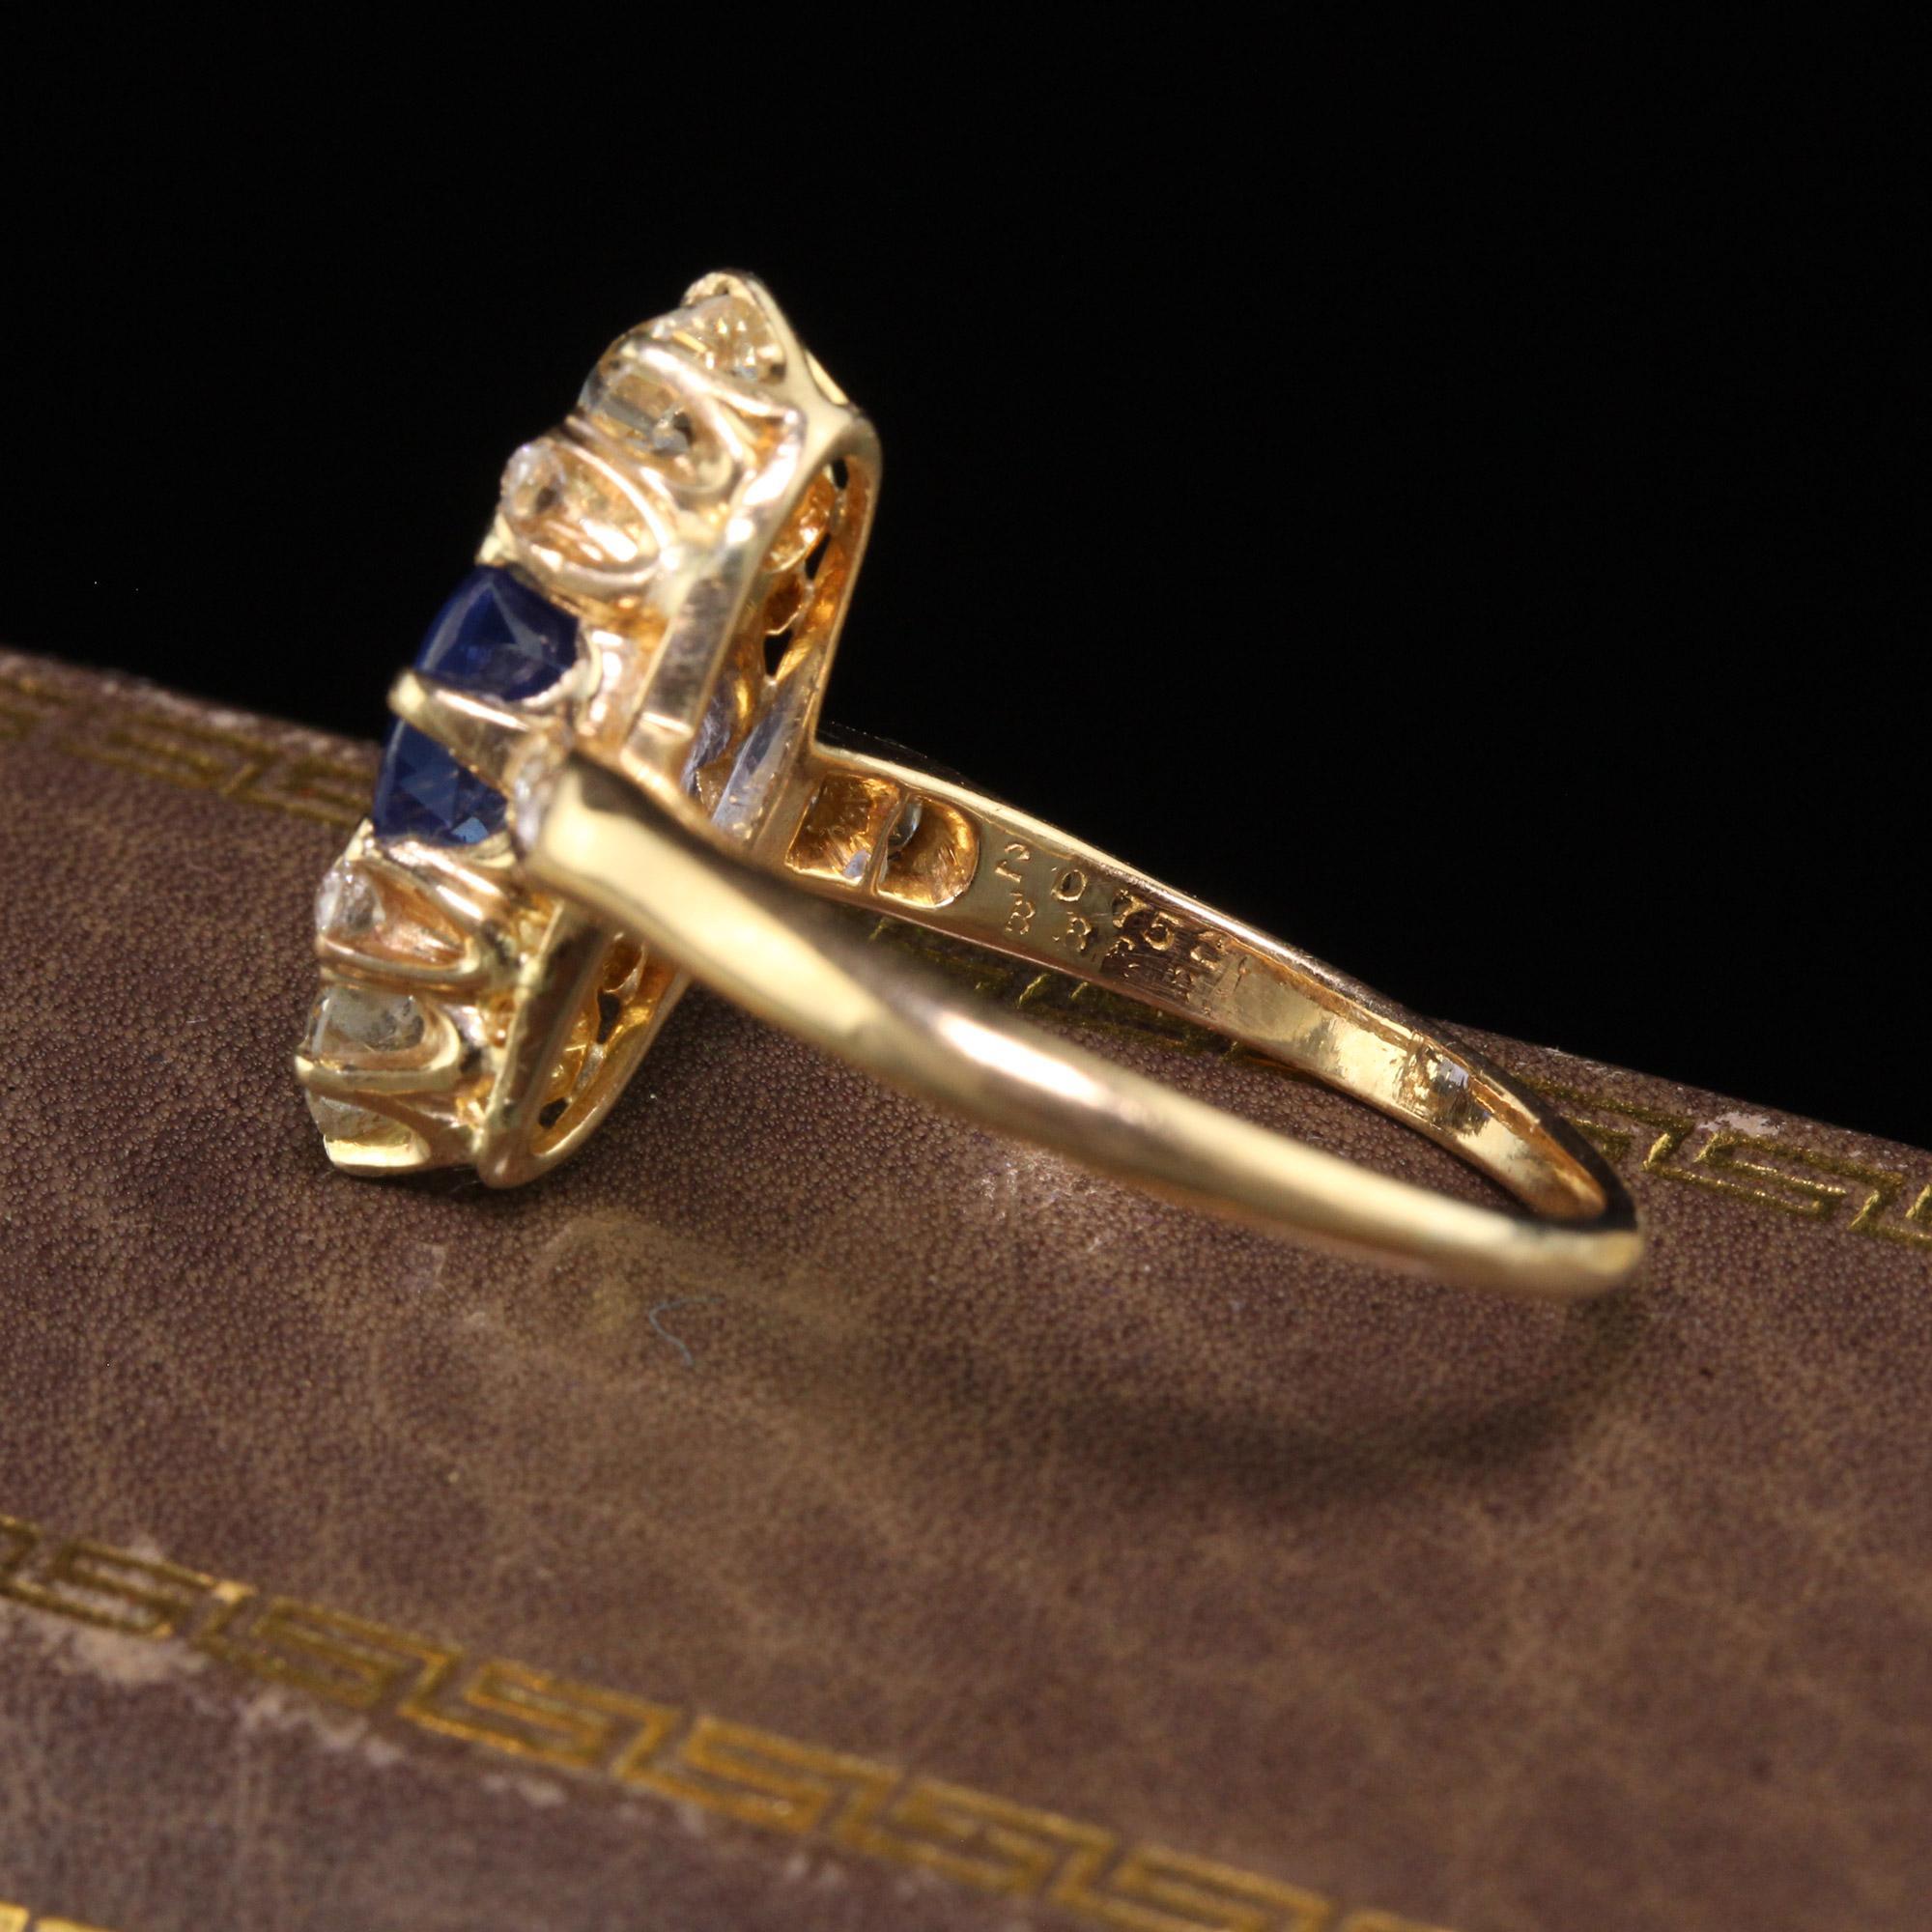 Antique Art Deco Bailey Banks Biddle 18K Yellow Gold Sapphire Diamond Ring - GIA In Good Condition For Sale In Great Neck, NY